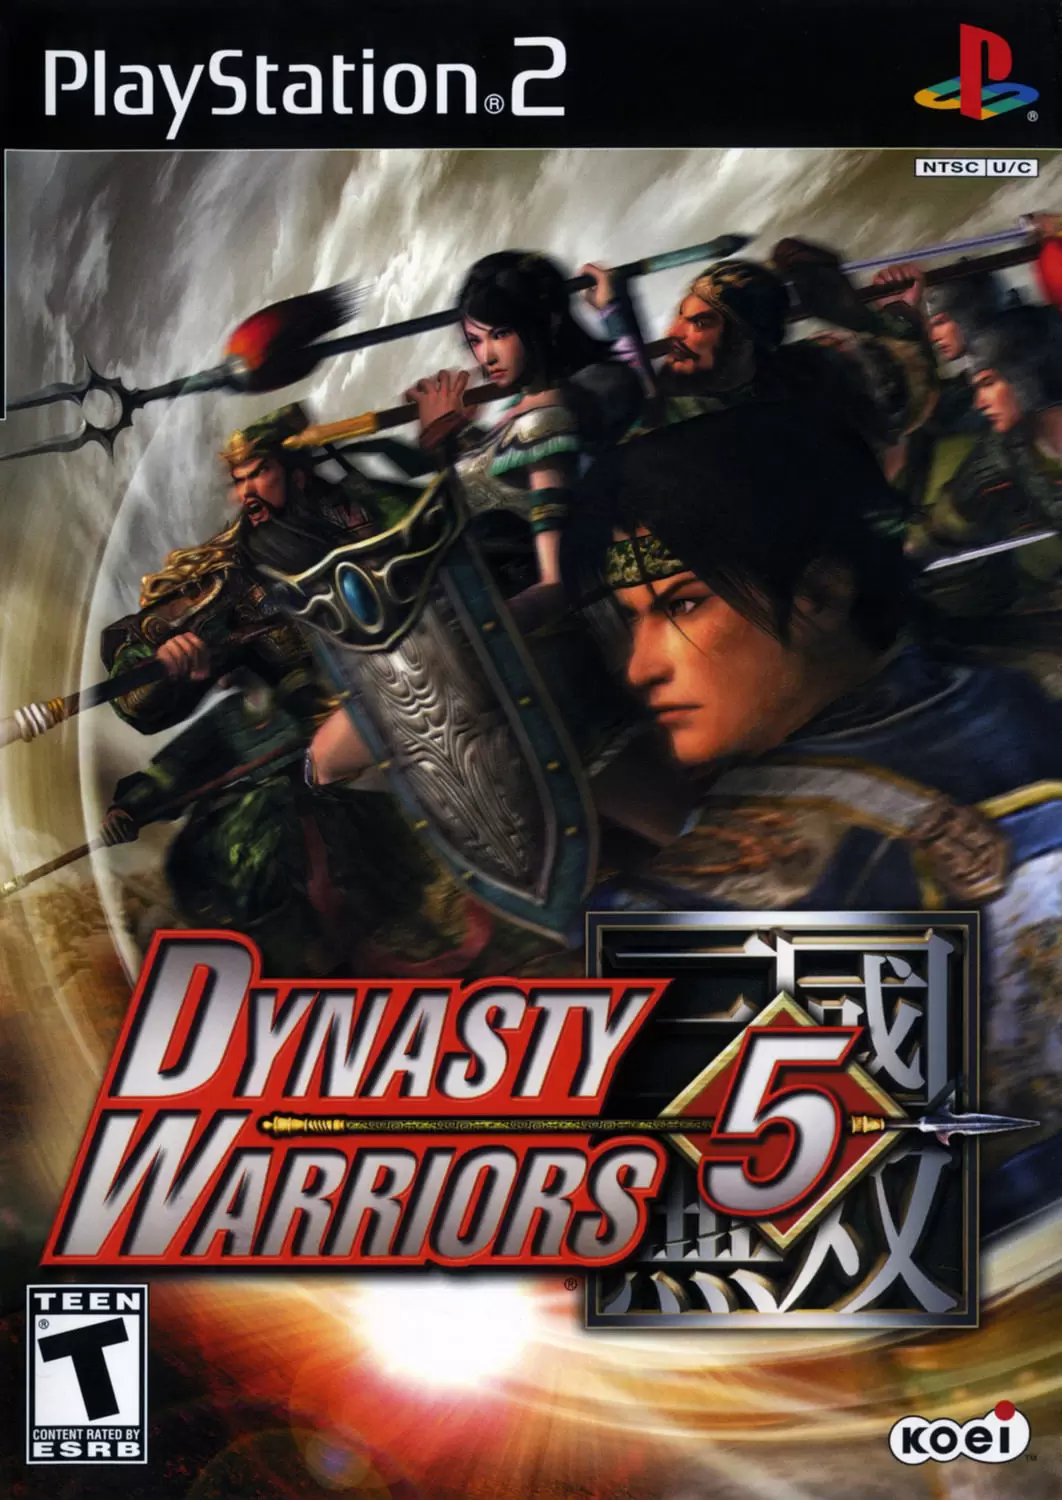 PS2 Games - Dynasty Warriors 5